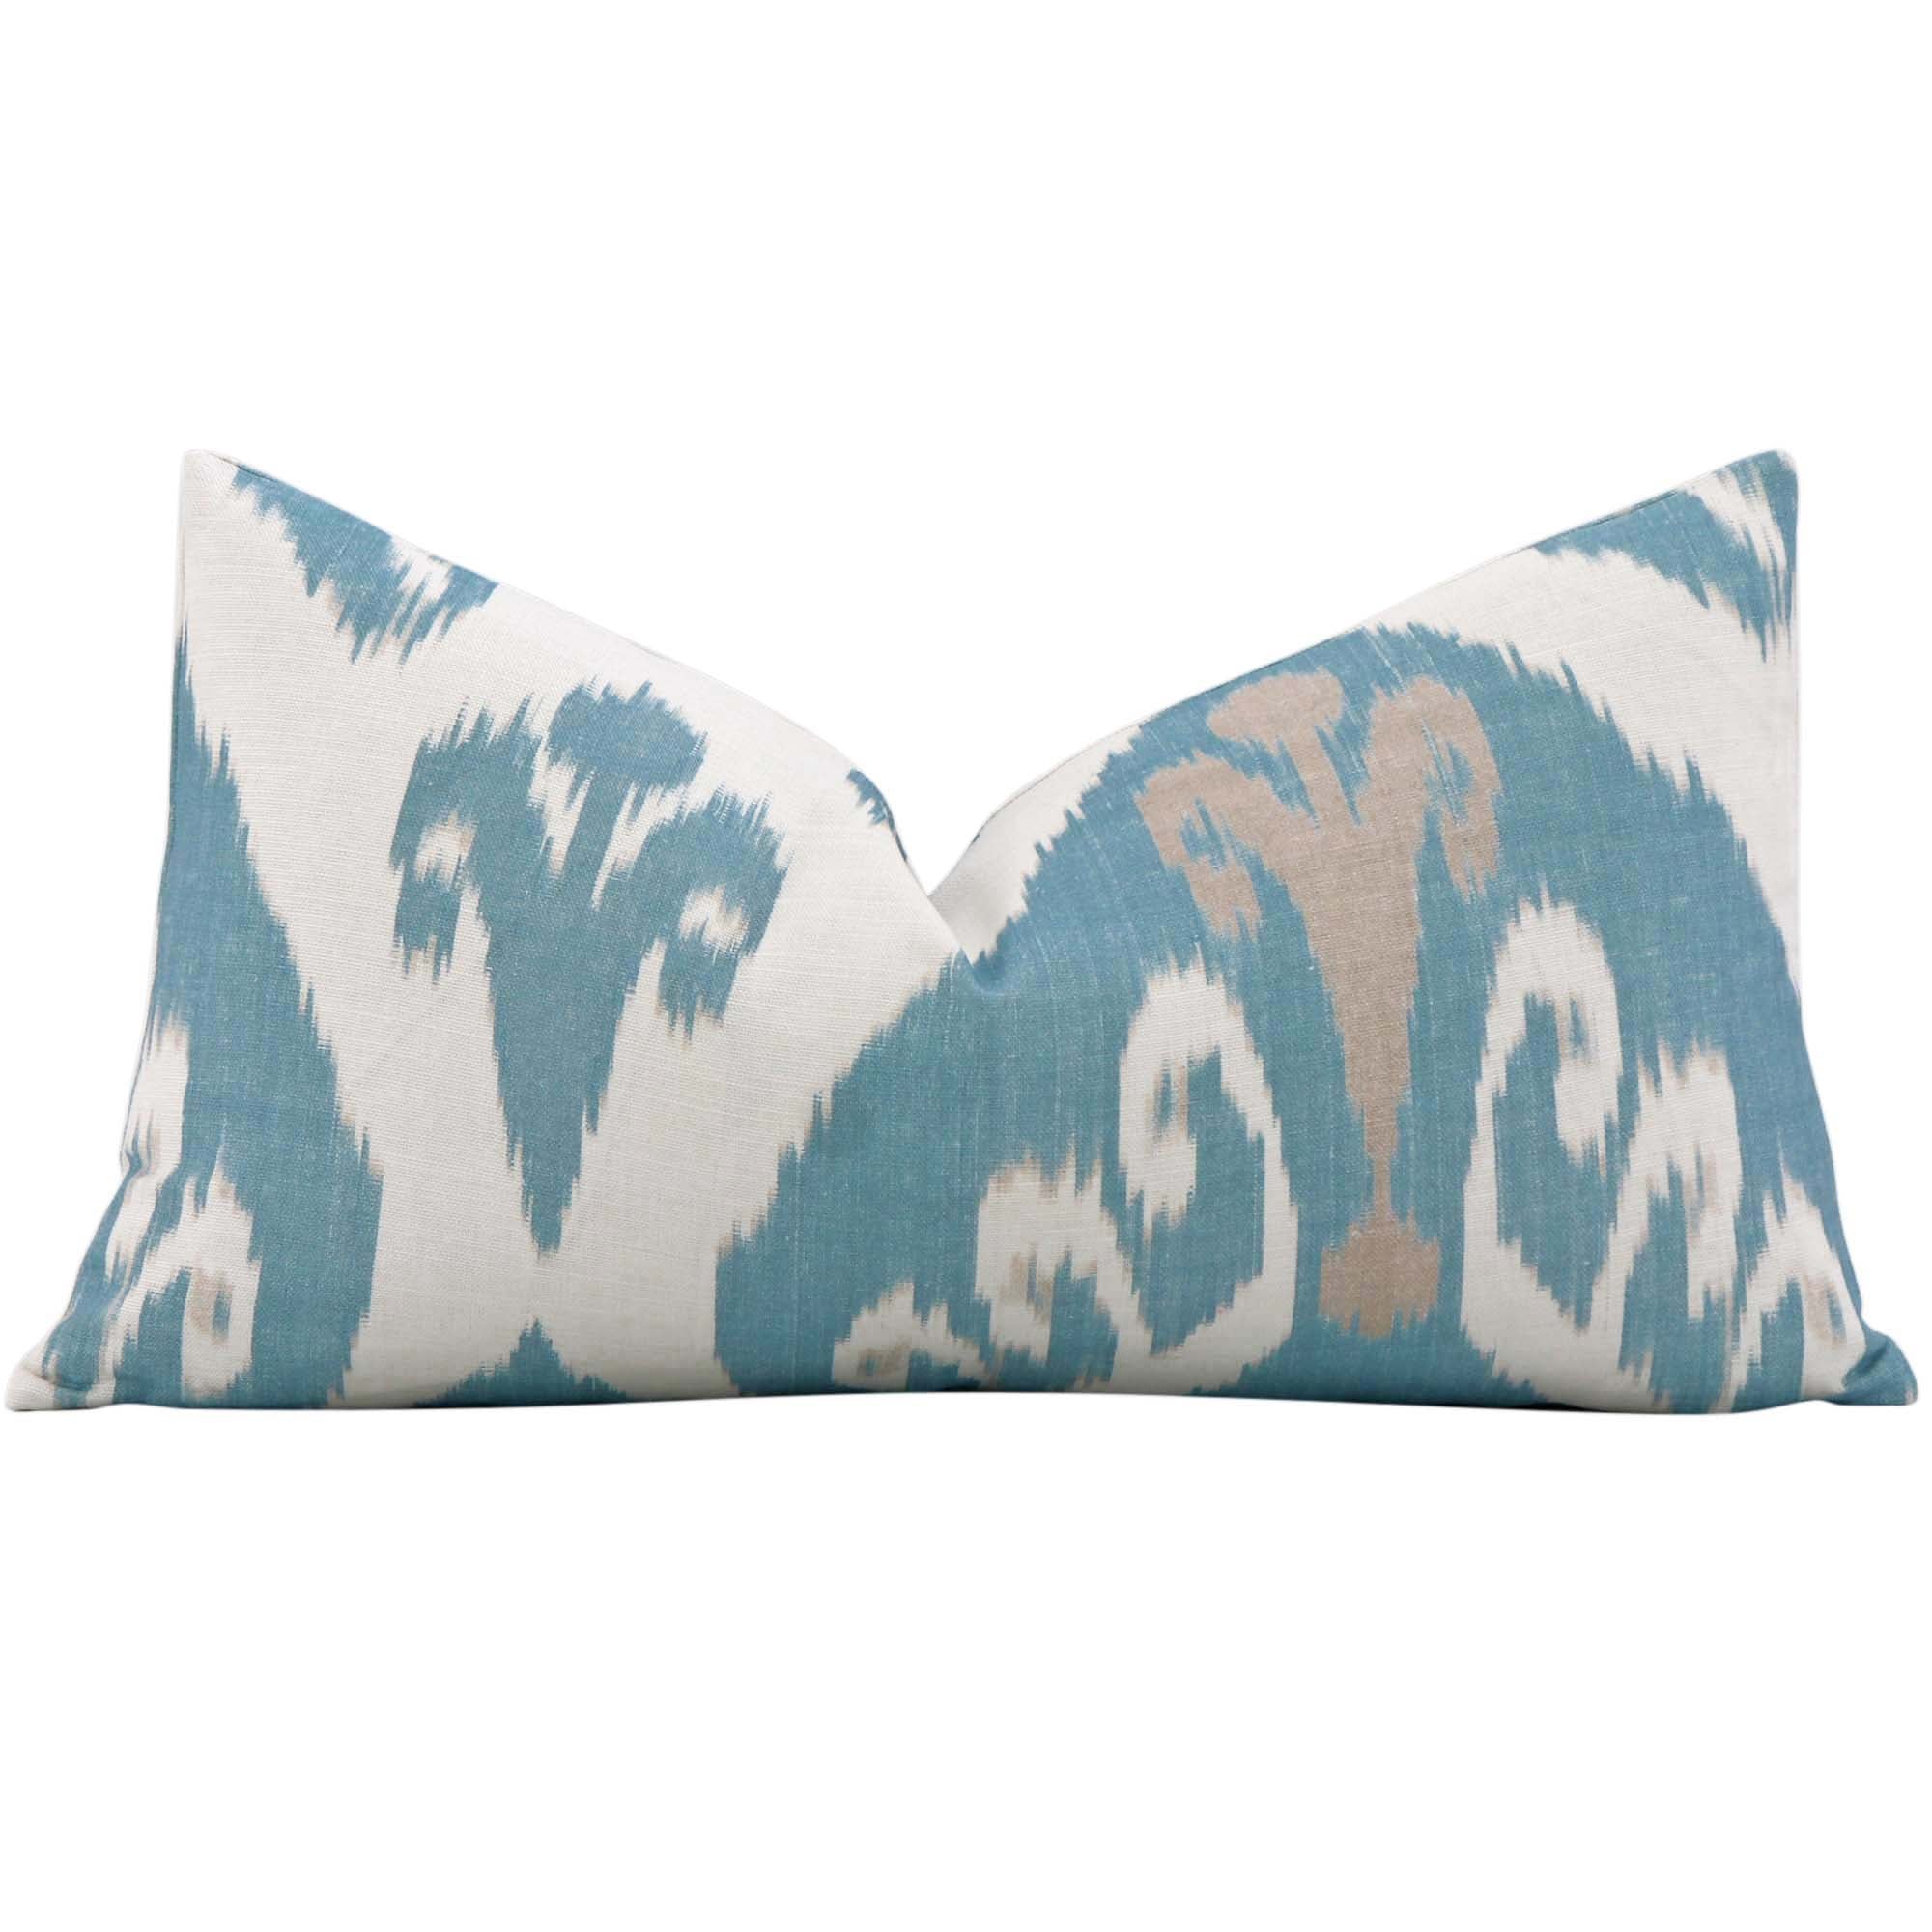 Thibaut Indies Ikat French Blue Large Scale Bold Graphic Designer Decorative Lumbar Throw Pillow Cover